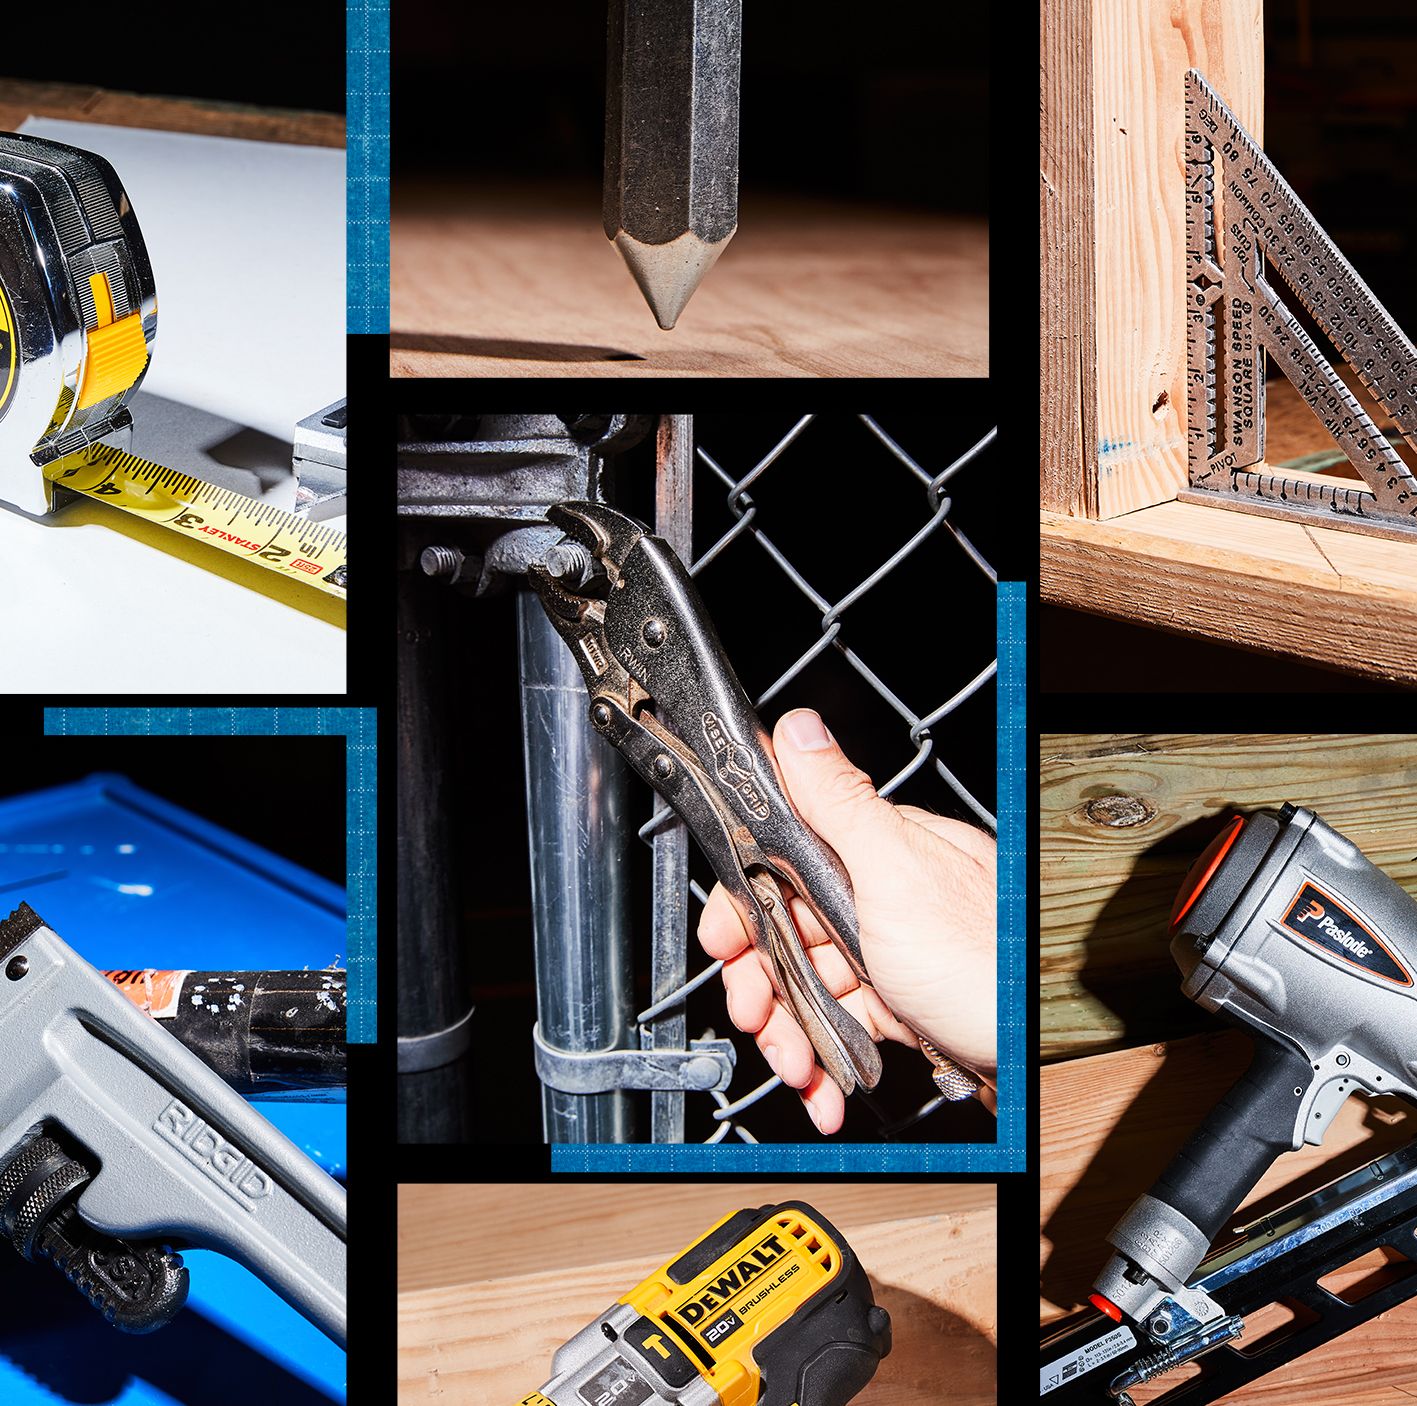 tape measure, plump bob, speed square, oscillating multitool, utility knife, nailer, locking pliers, pipe wrench